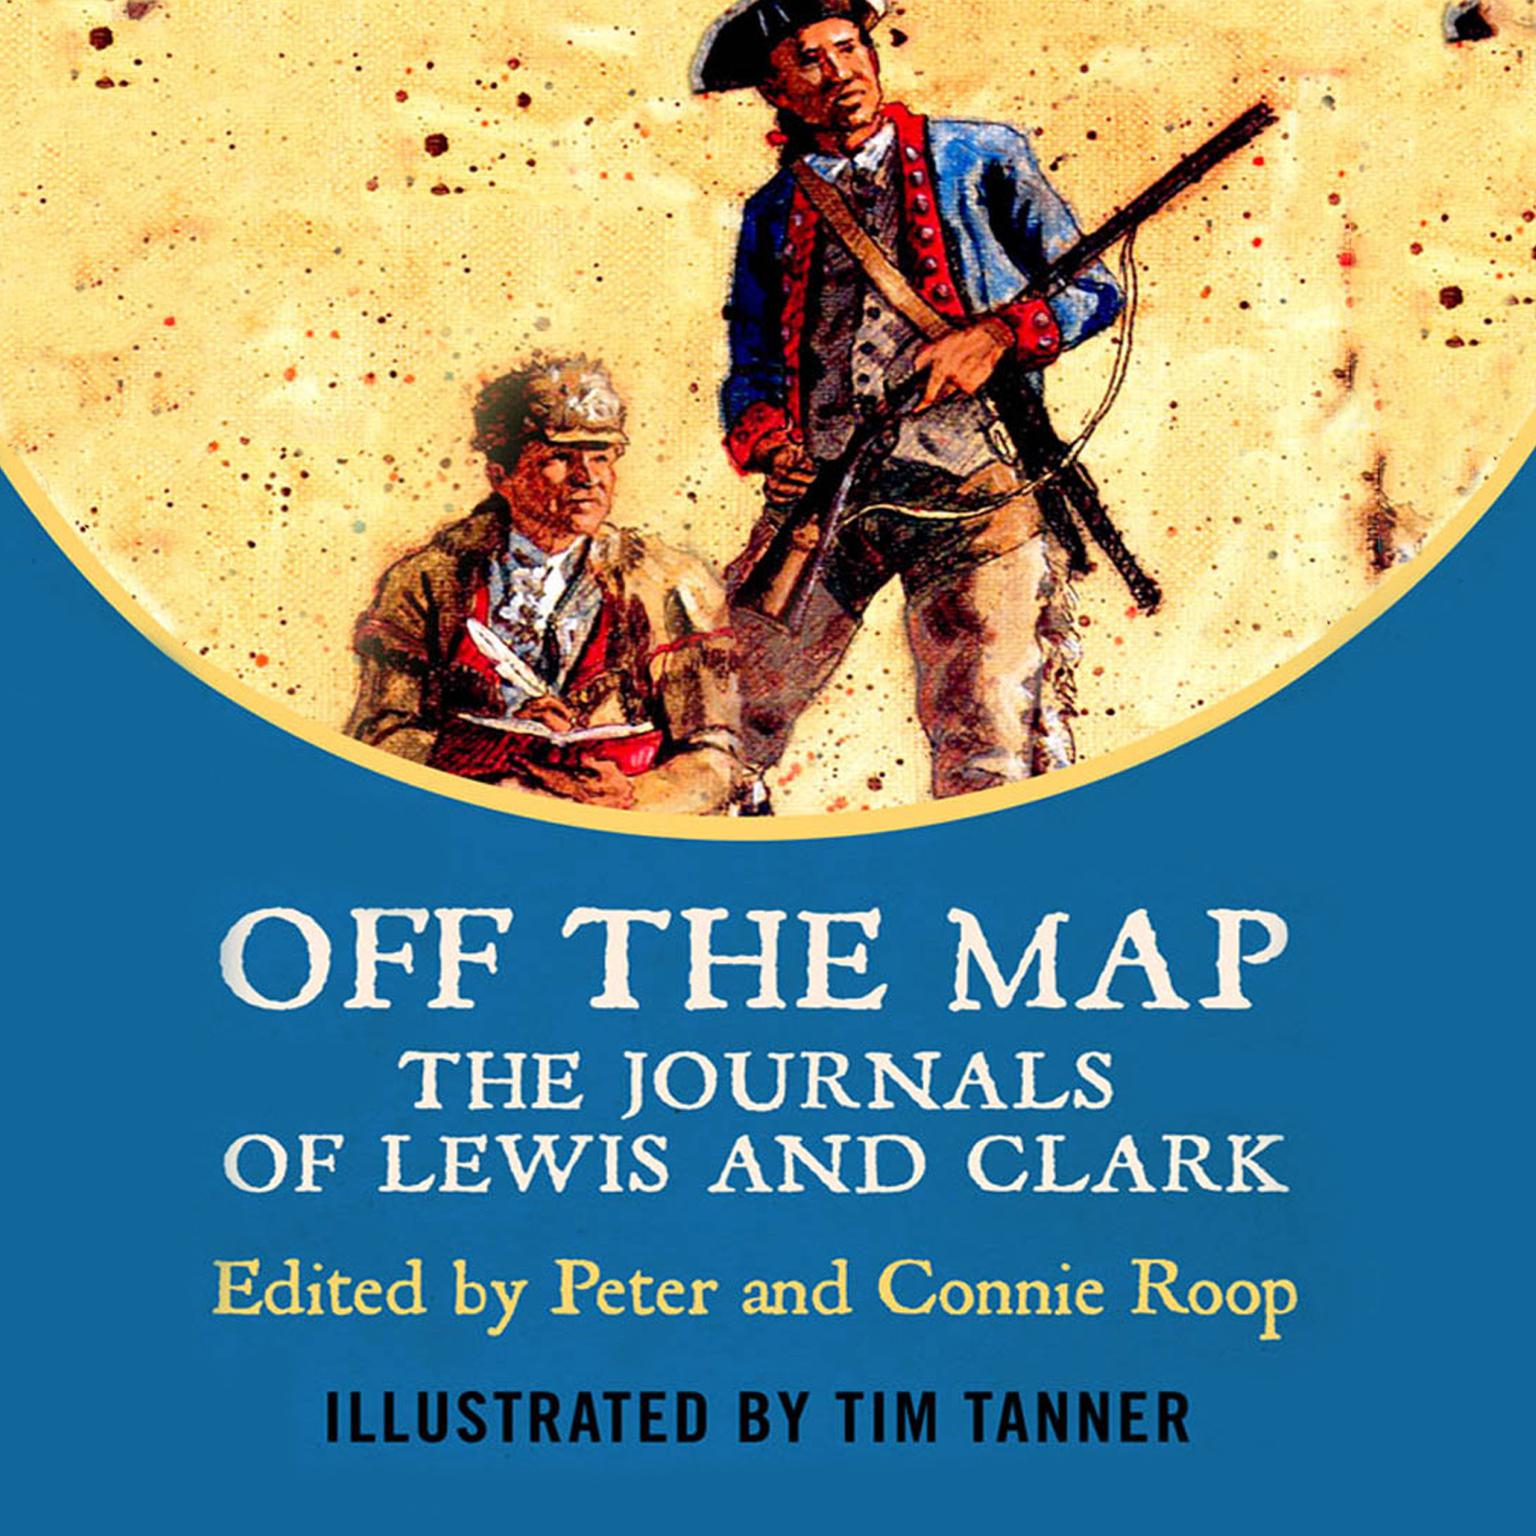 Off The Map: The Journals of Lewis and Clark Audiobook, by Meriwether Lewis